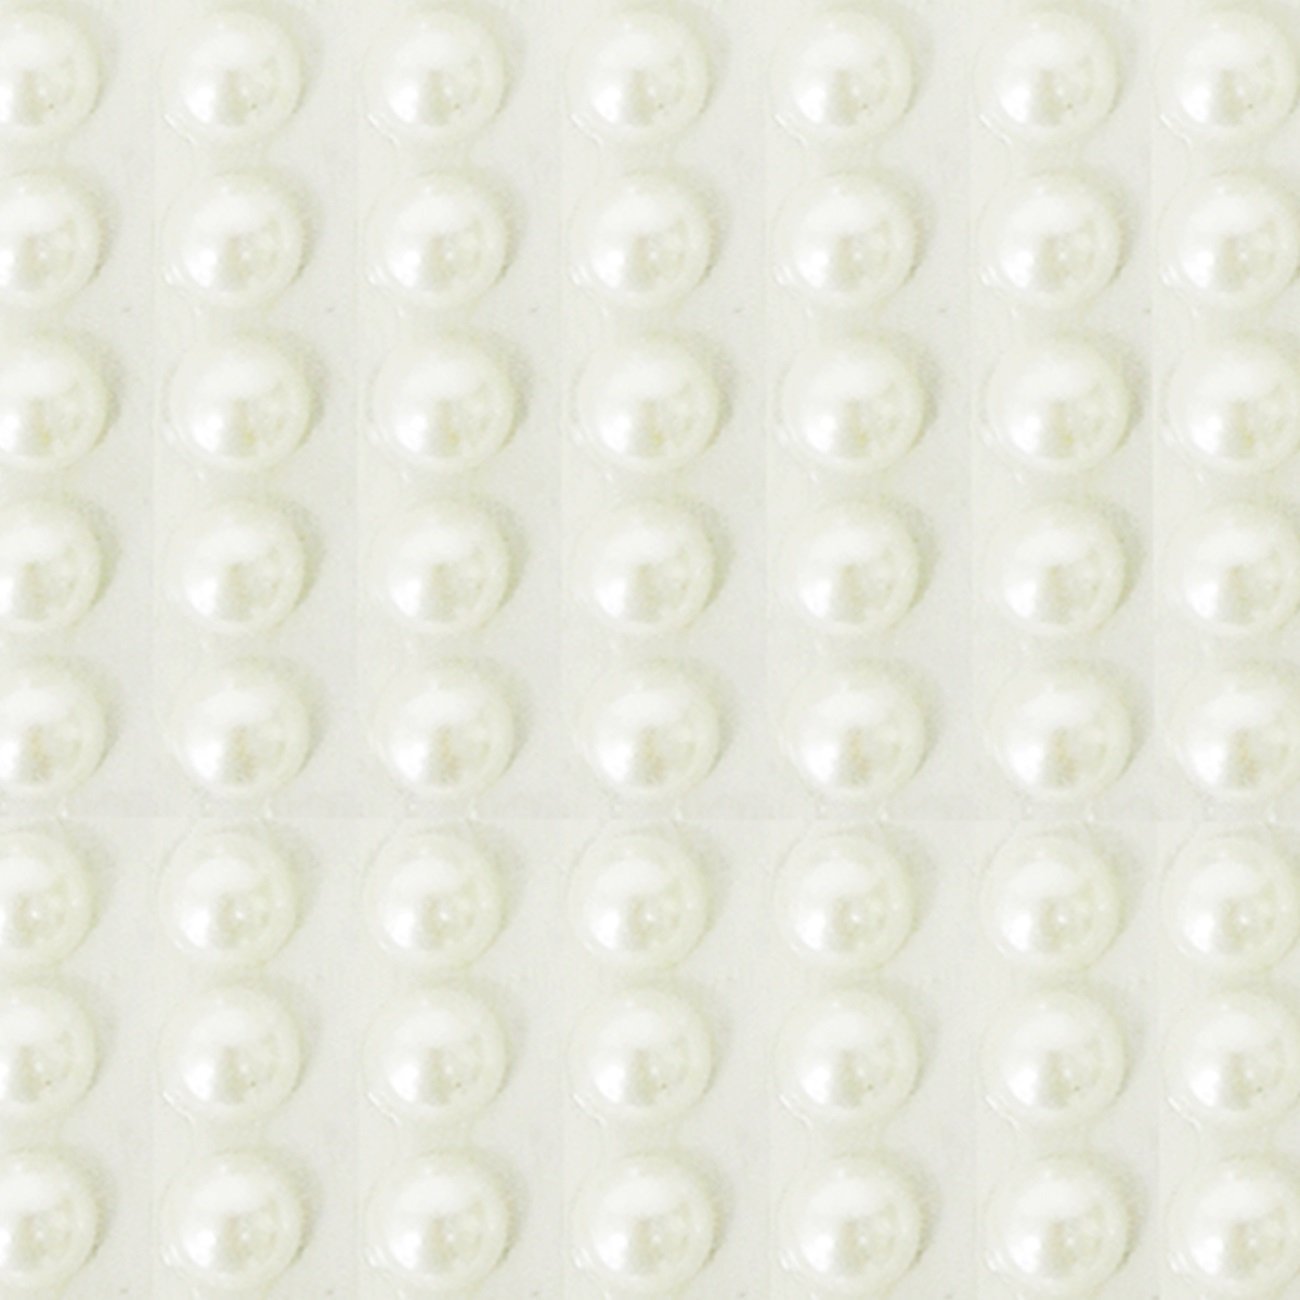 Wrapables 6mm Self Adhesive Pearl Stickers, 420pcs